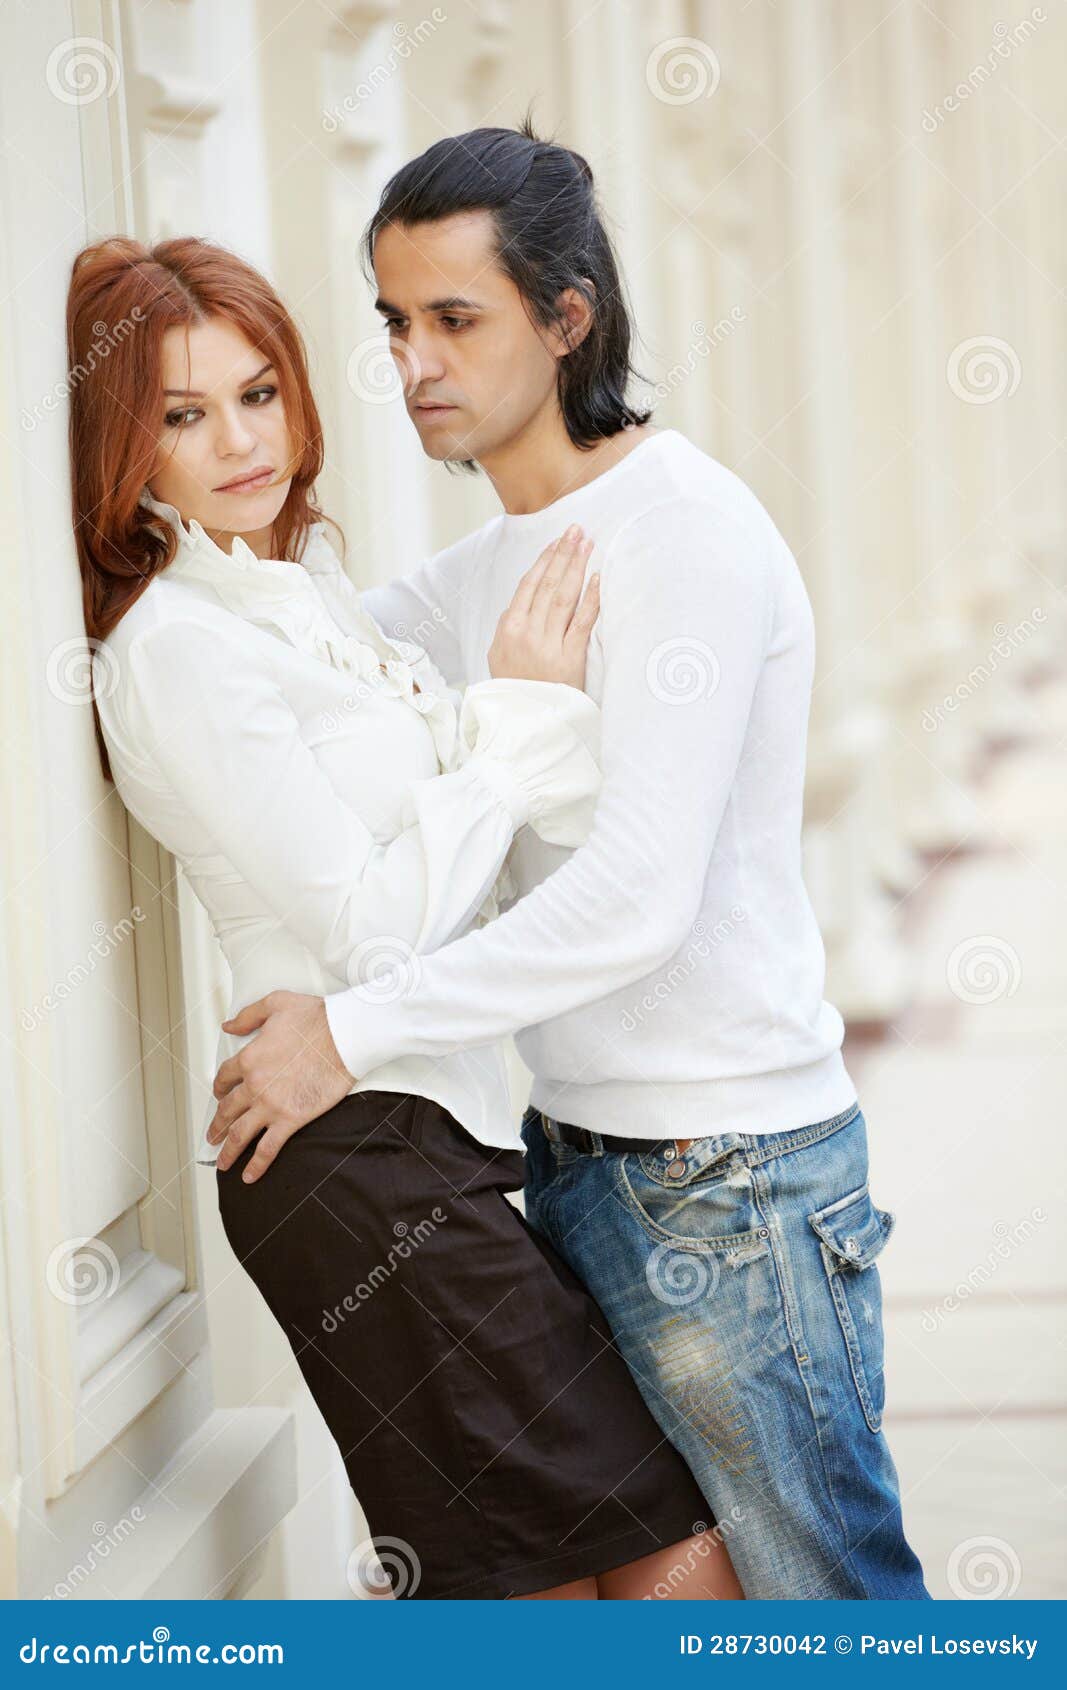 Woman Stands, Leaning at Wall and Man Embraces Her Stock Photo photo